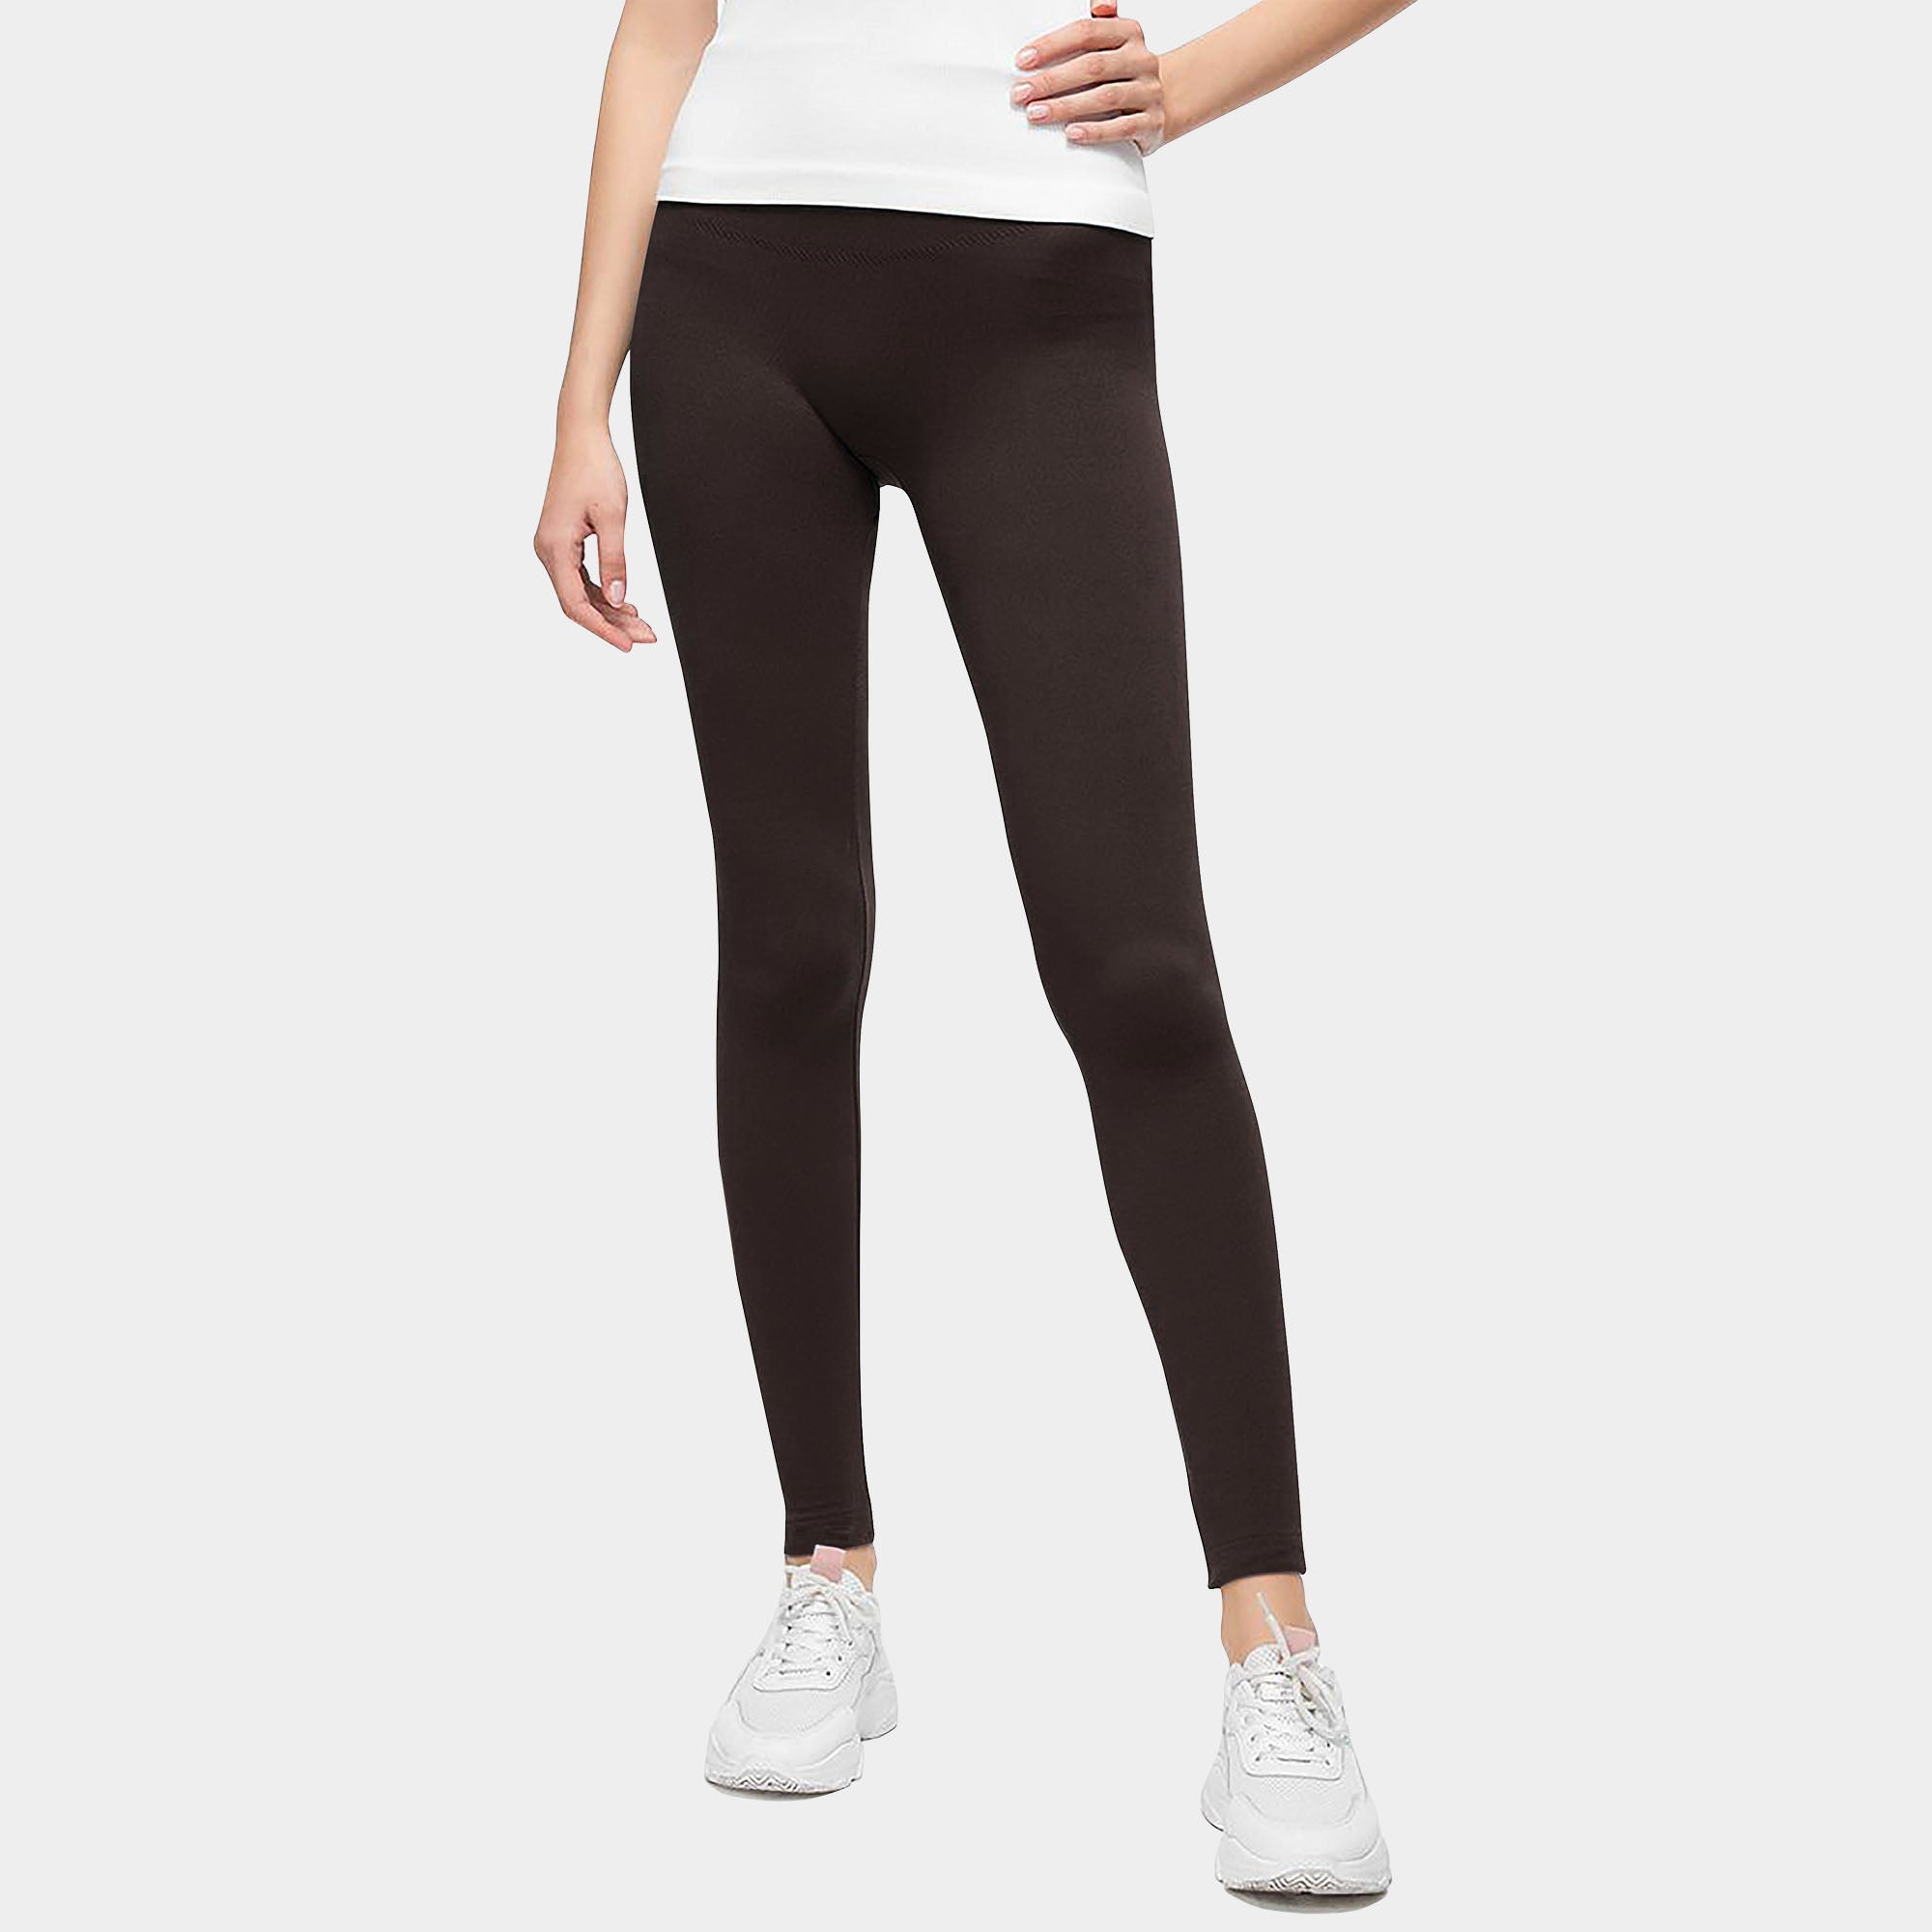 high_waist_inner_soft_lined_waistband_lightweight_yoga_thermal_cozy_comfortable_fashionable_pants_leggins_leggings_spanx_leather_ballet_pilates_polainas_de_las_mujeres_workout_compression_wrinkle_resistant_treggings_best_sexy_jegging_women_girl_girls_womens_spandex_running_winter_squat_thick_cheap_anti_cellulite_pants_sweatpant_sweatpants_ladies_Coffee